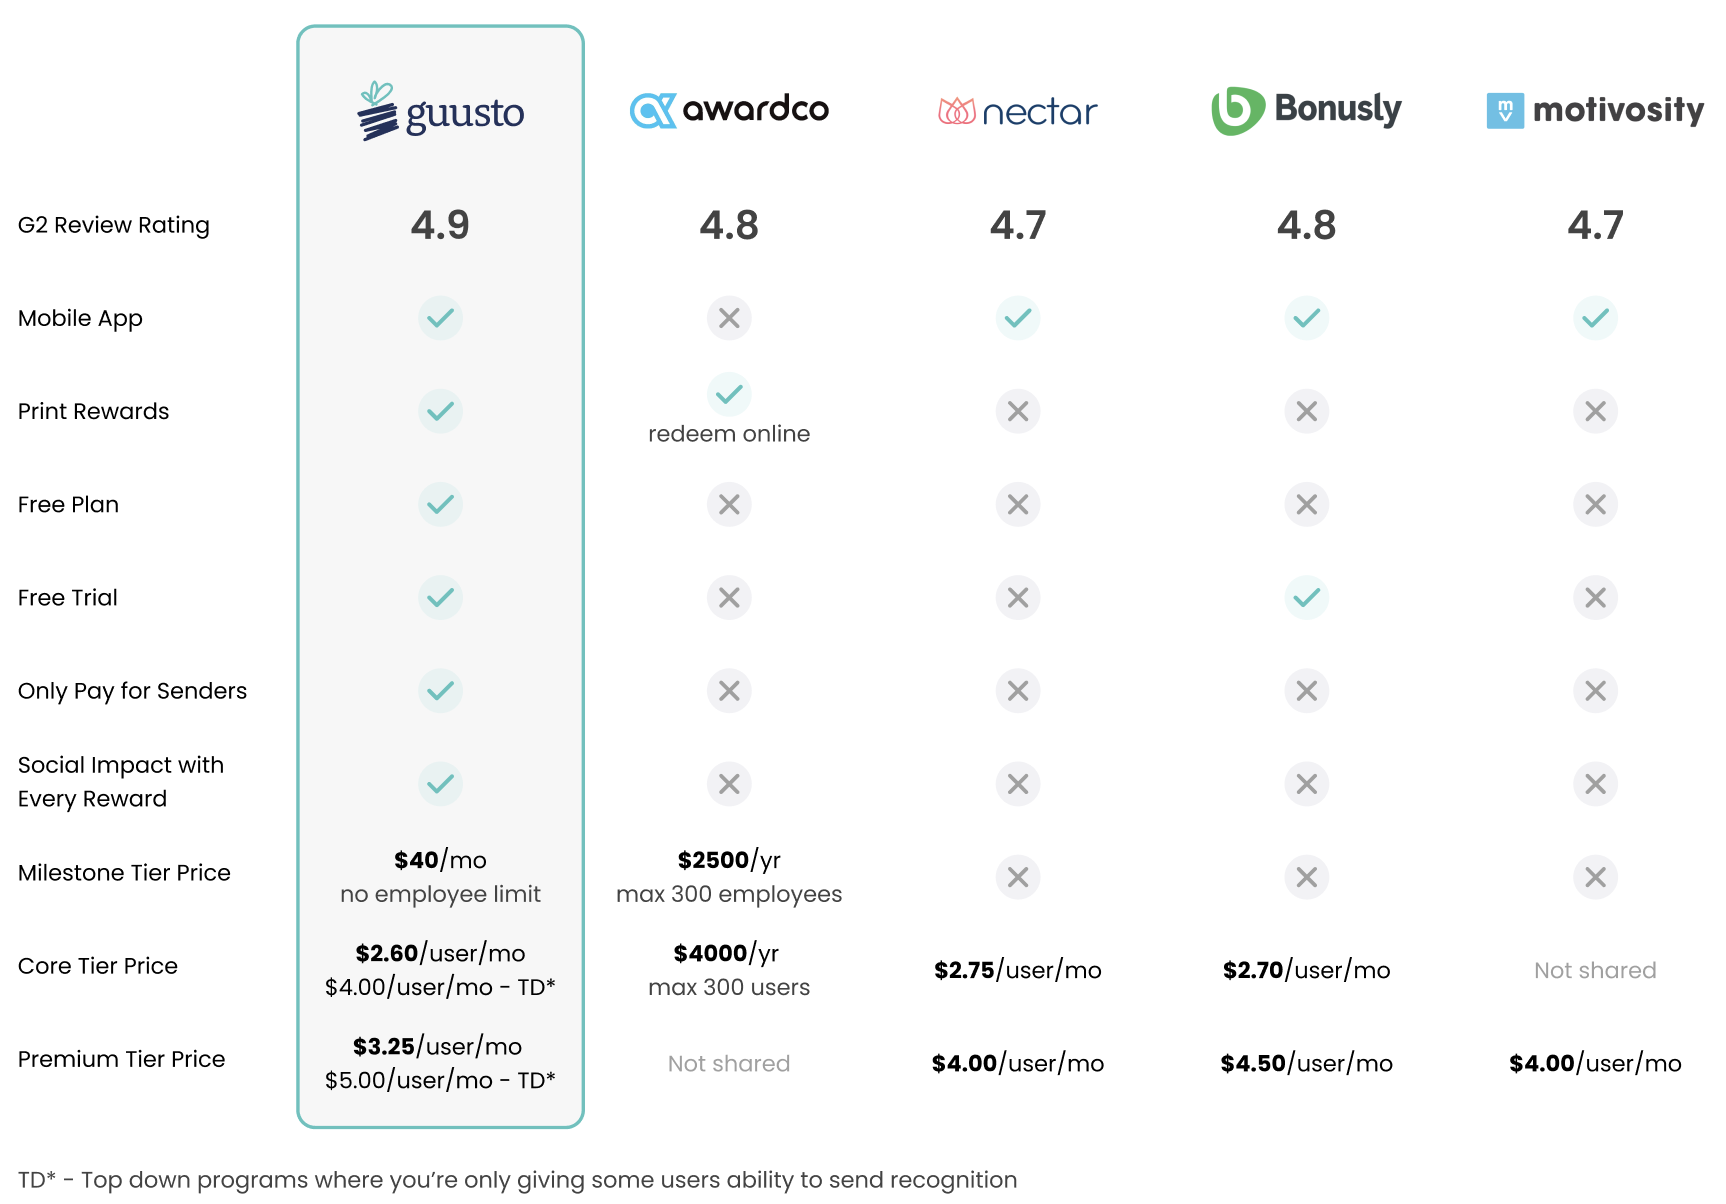 See how Guusto stacks up against other recognition providers.